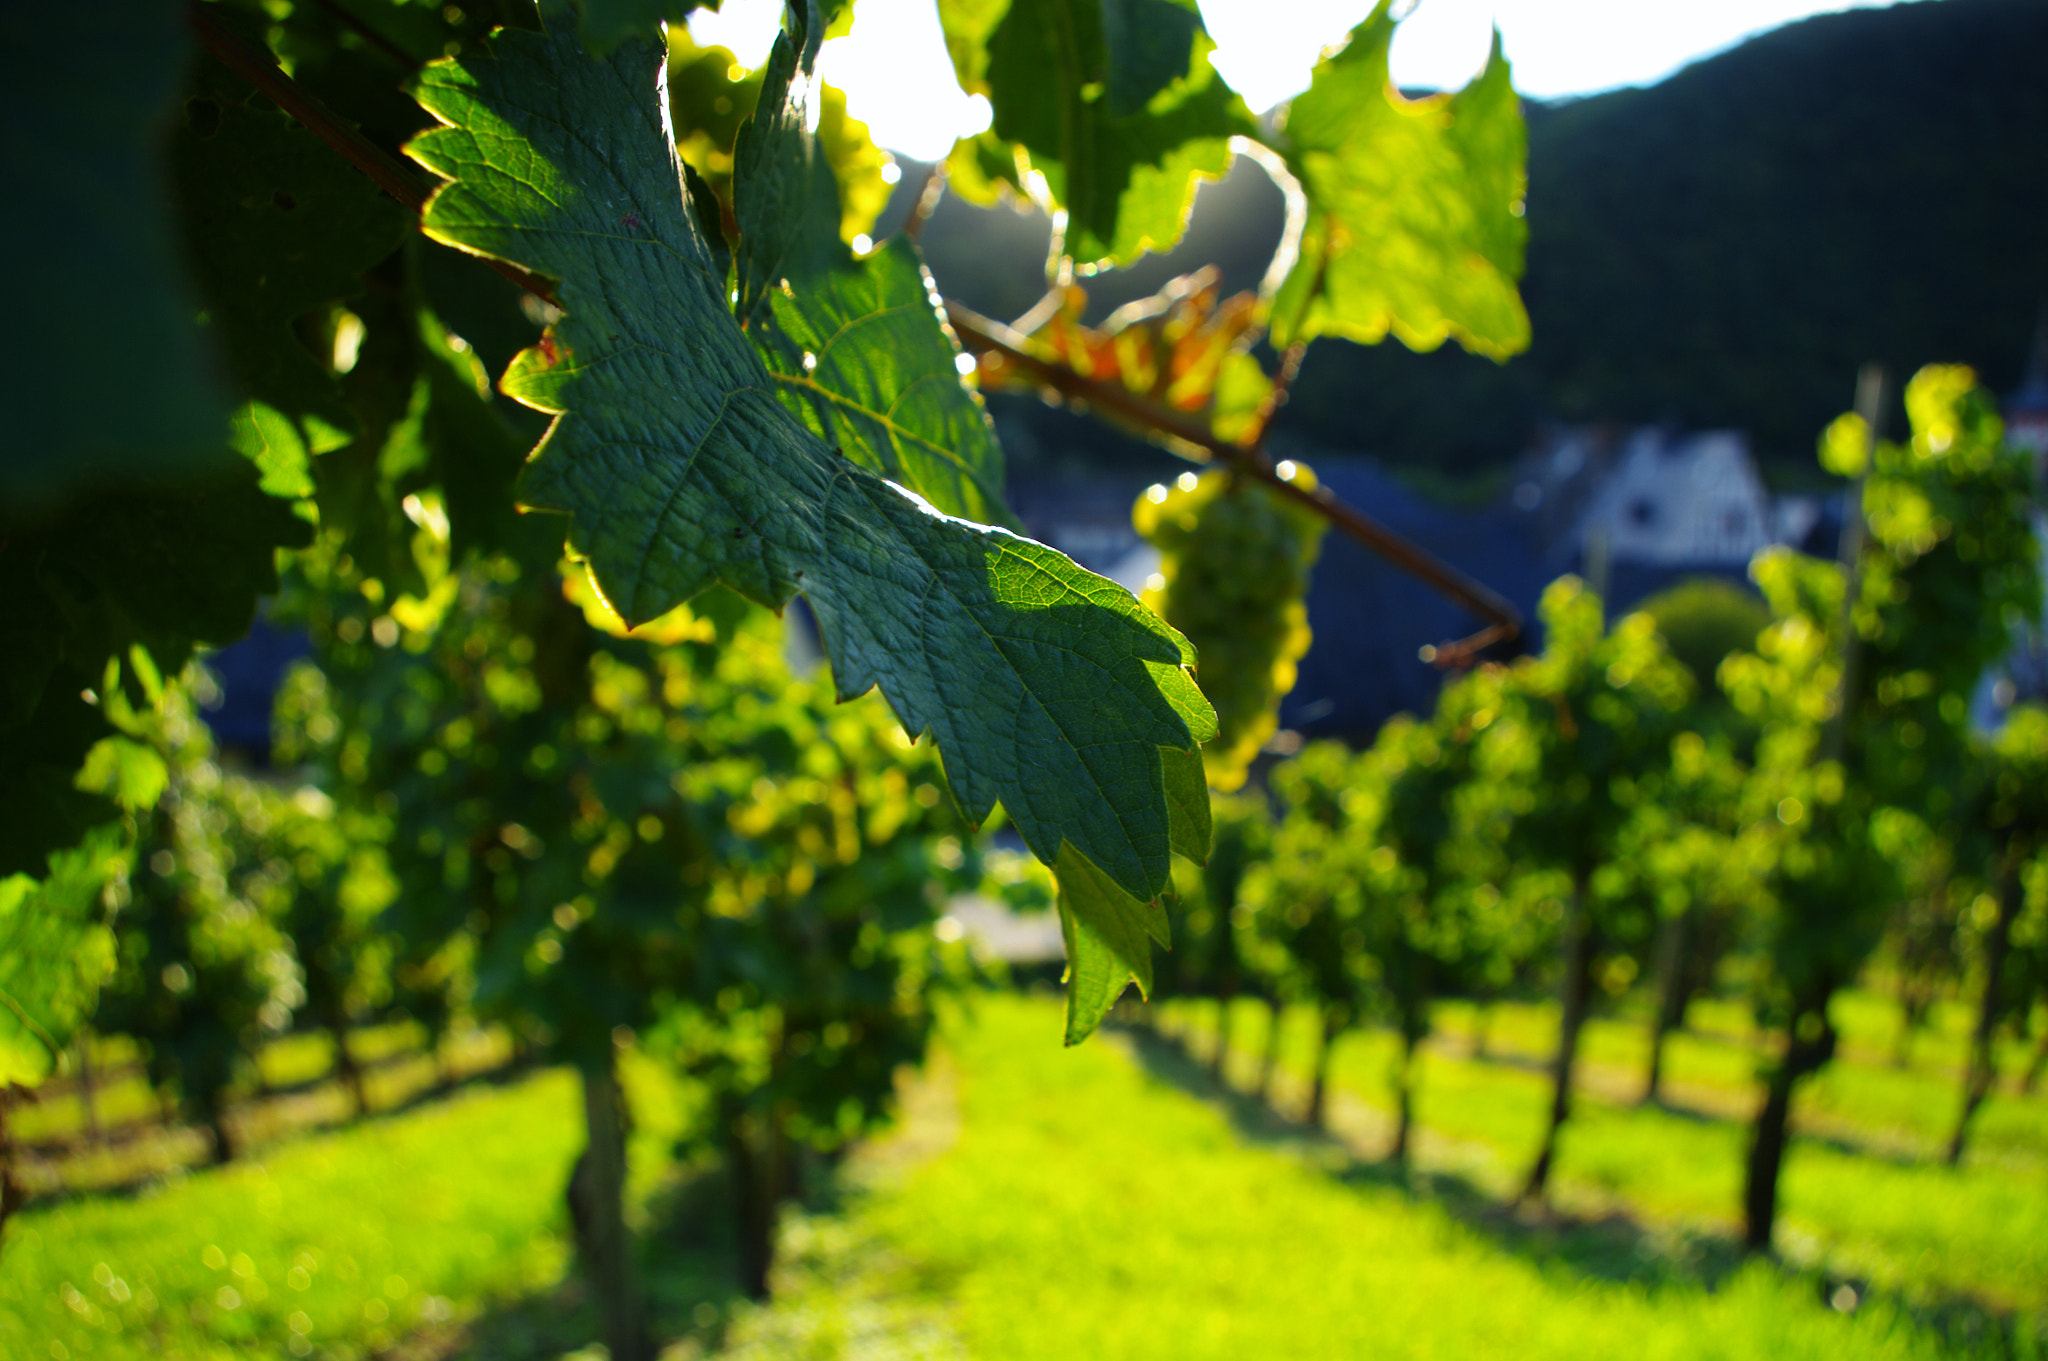 Samsung/Schneider D-XENON 18-55mm F3.5-5.6 sample photo. The riesling grape photography